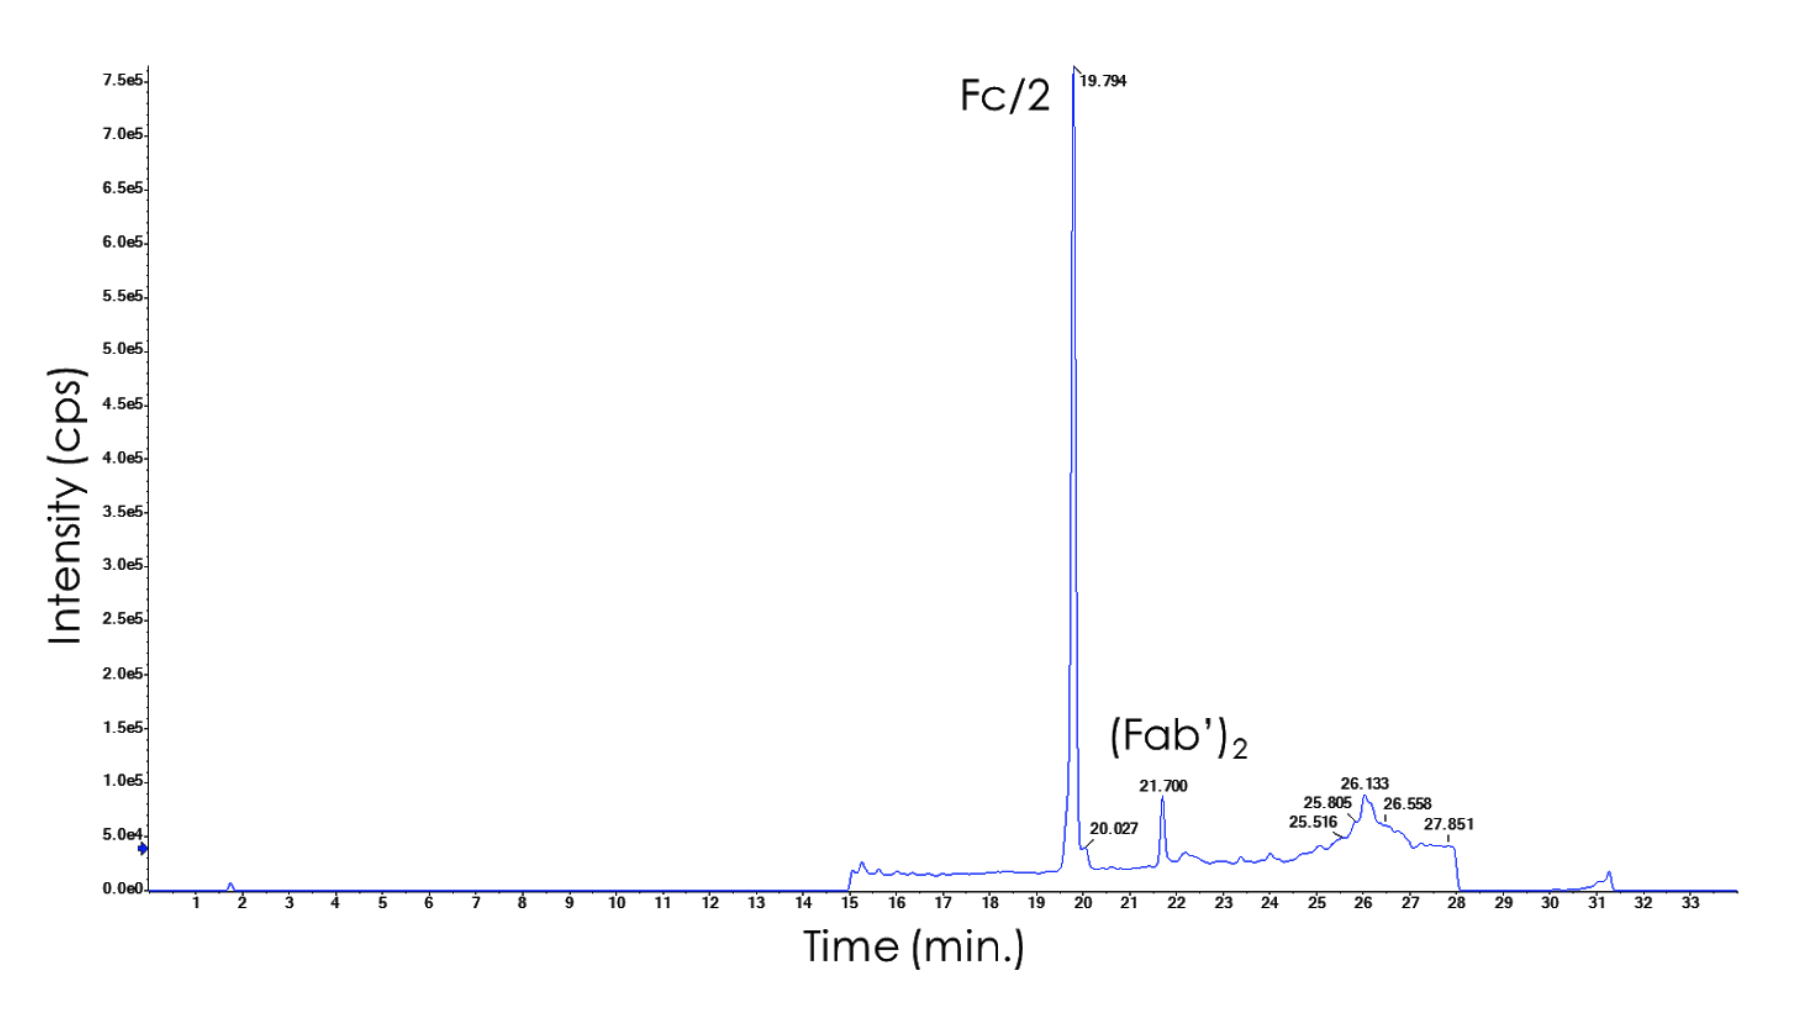 Line graph. Intensity (cps) on y-axis from 0.0e0-7.5e5 in increments of 5e4. Time (min) on x-axis from 0-33 in increments of 1 min. Sample is digested into Fc and Fab antibody fragments, therefore high intensity peaks indicate Fc and Fab fragments.